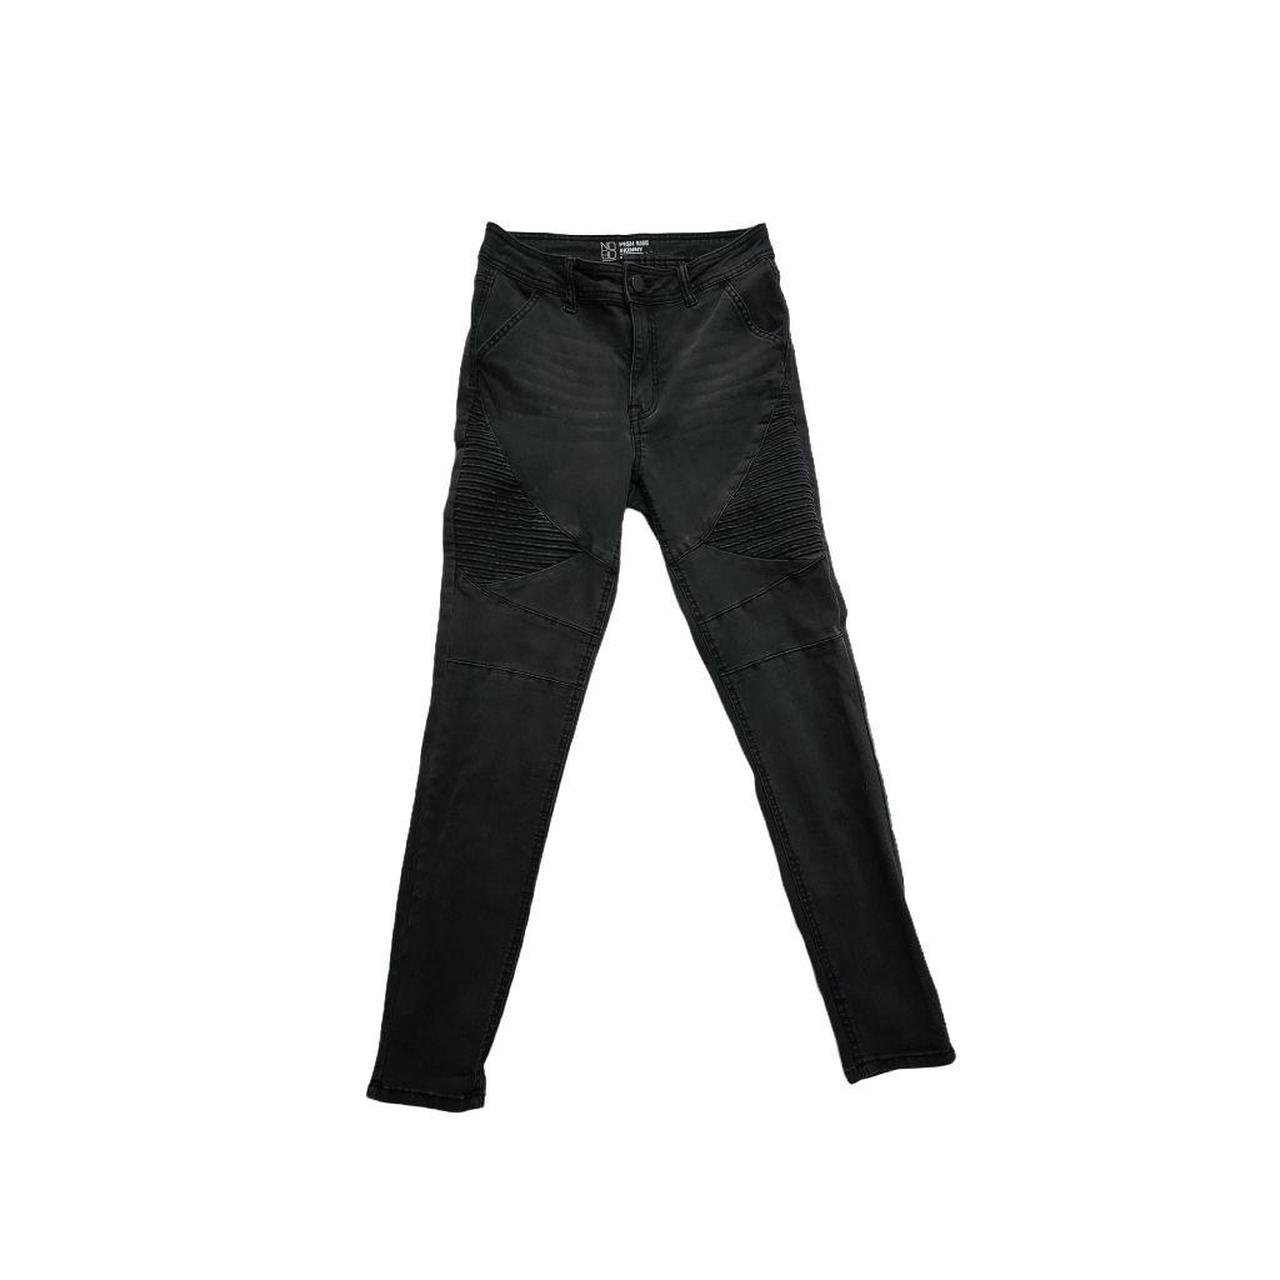 Product Image 1 - •faded black jeans
•moto design
•high rise
•skinny

Approximate